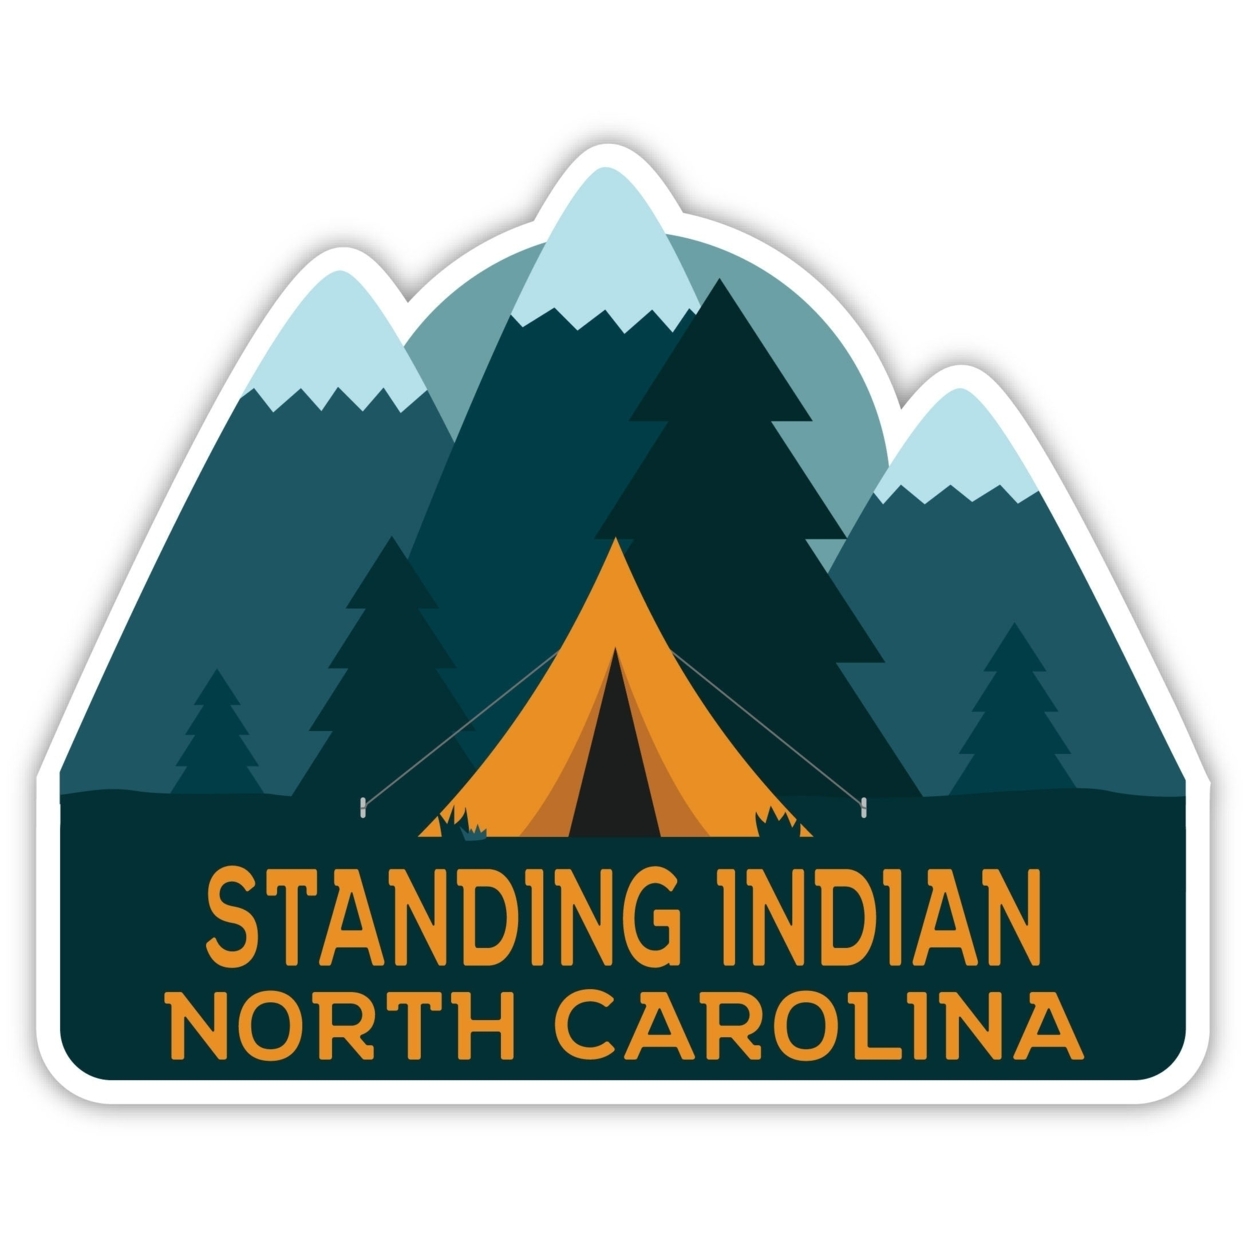 Standing Indian North Carolina Souvenir Decorative Stickers (Choose Theme And Size) - Single Unit, 4-Inch, Tent